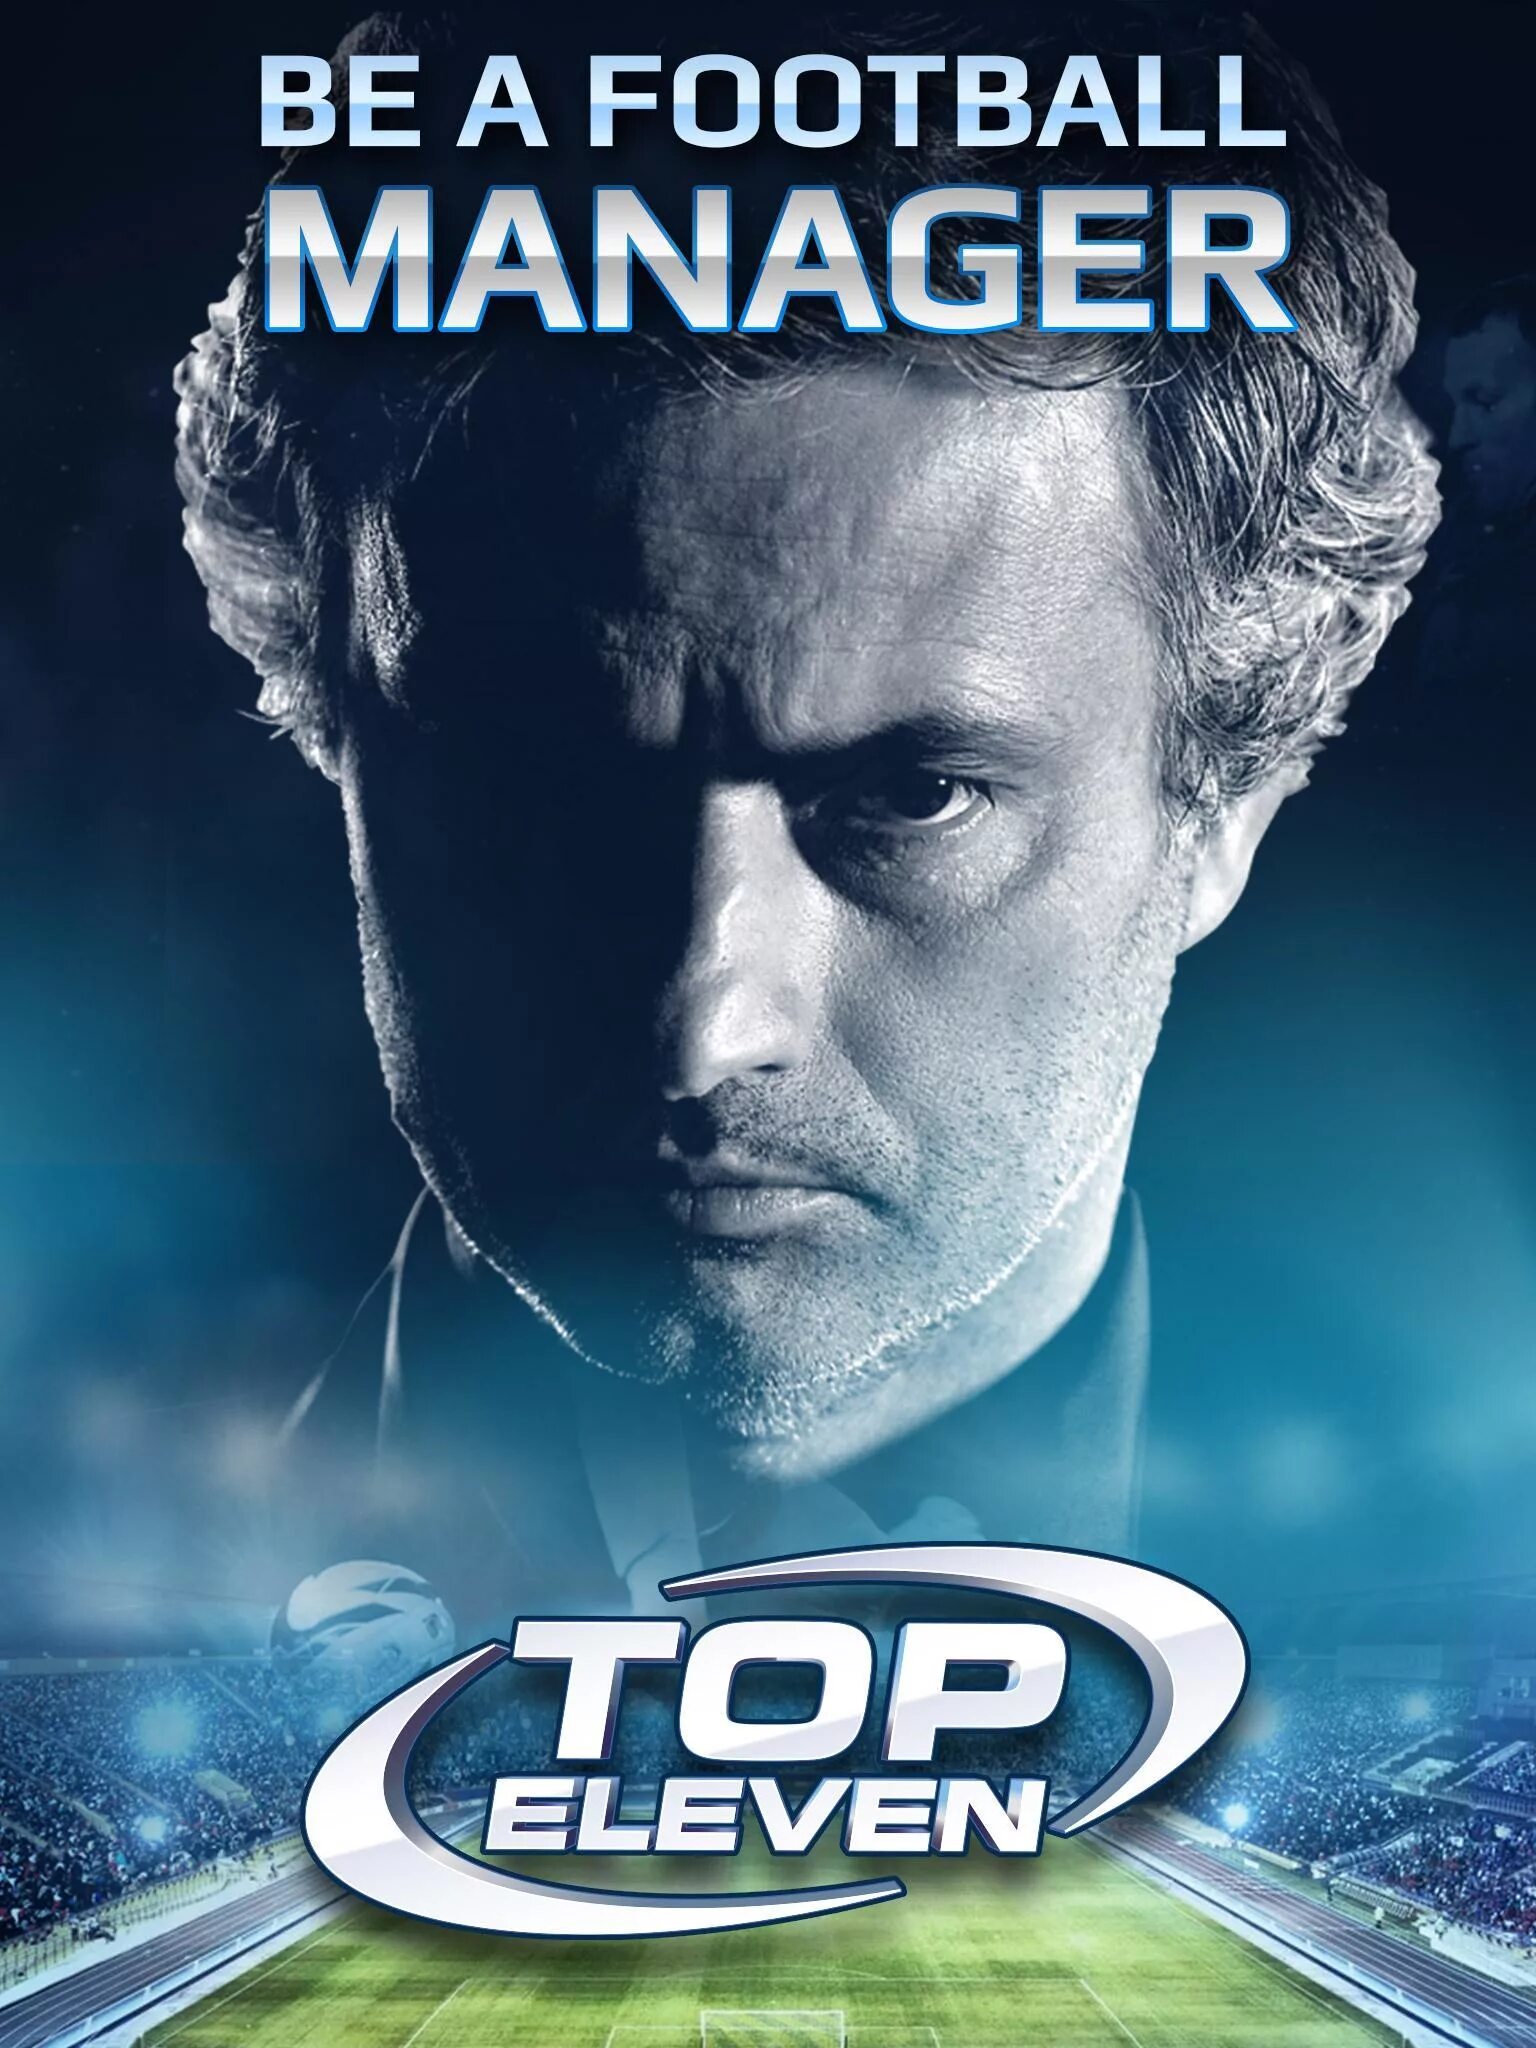 Top Eleven. Top Eleven Football Manager. Top Eleven Android. Top Eleven 2012.